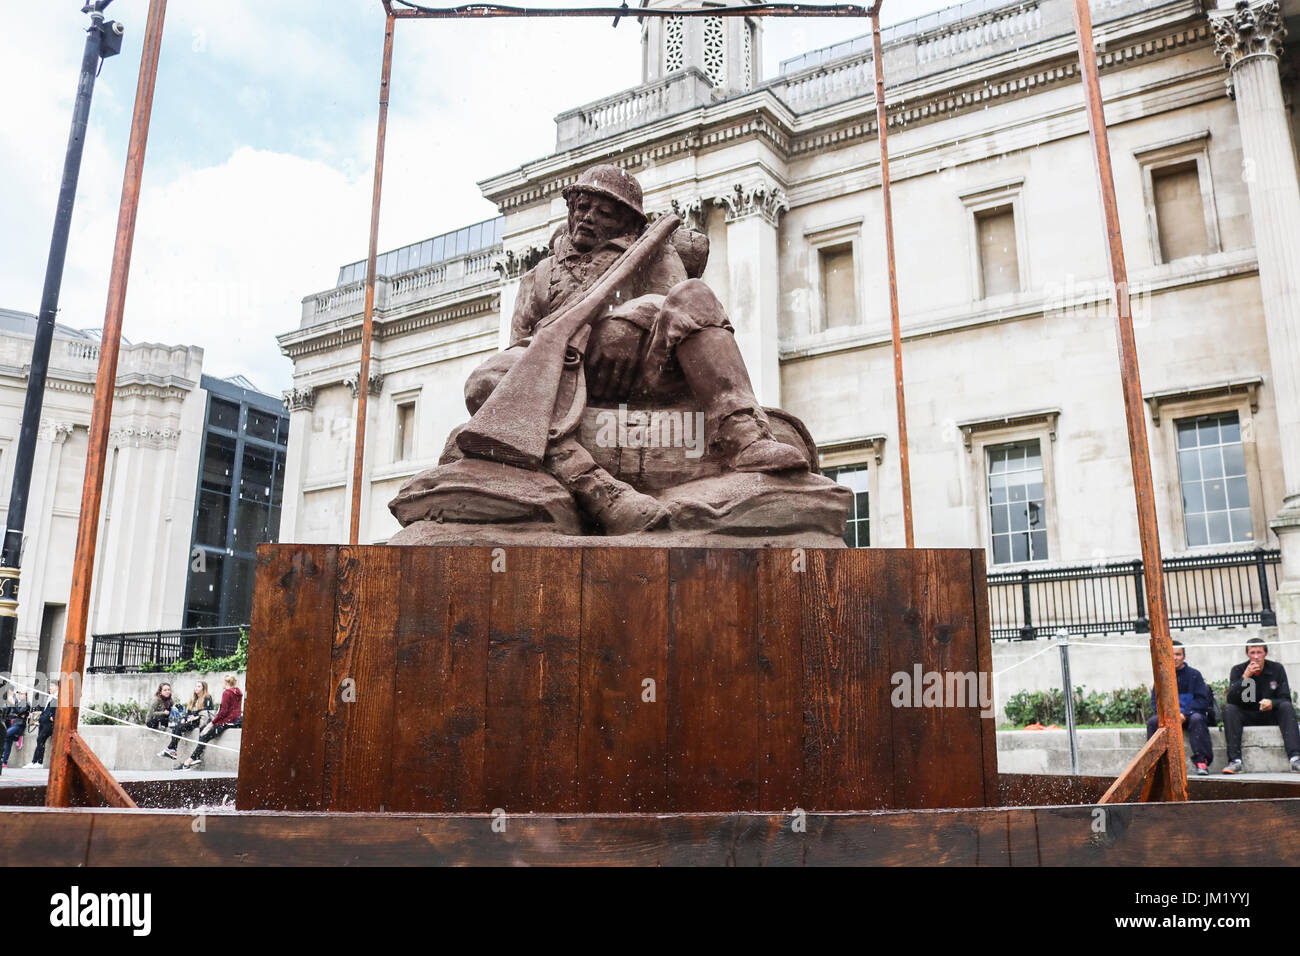 London, UK. 25th July, 2017. The Mud Soldier sculpture in Trafalgar Square created  from mud and sand from Flanders Fields  to mark the start of the Battle of Passchendaele in Belgium on July 31, 1917. The art installation by  artists, Damian and Killian Van Der Velden will slowly dissolve as it is exposed to rain to symbolise  the quagmire and muddy trenches experienced by Allied soldiers.Credit: amer ghazzal/Alamy Live News Stock Photo